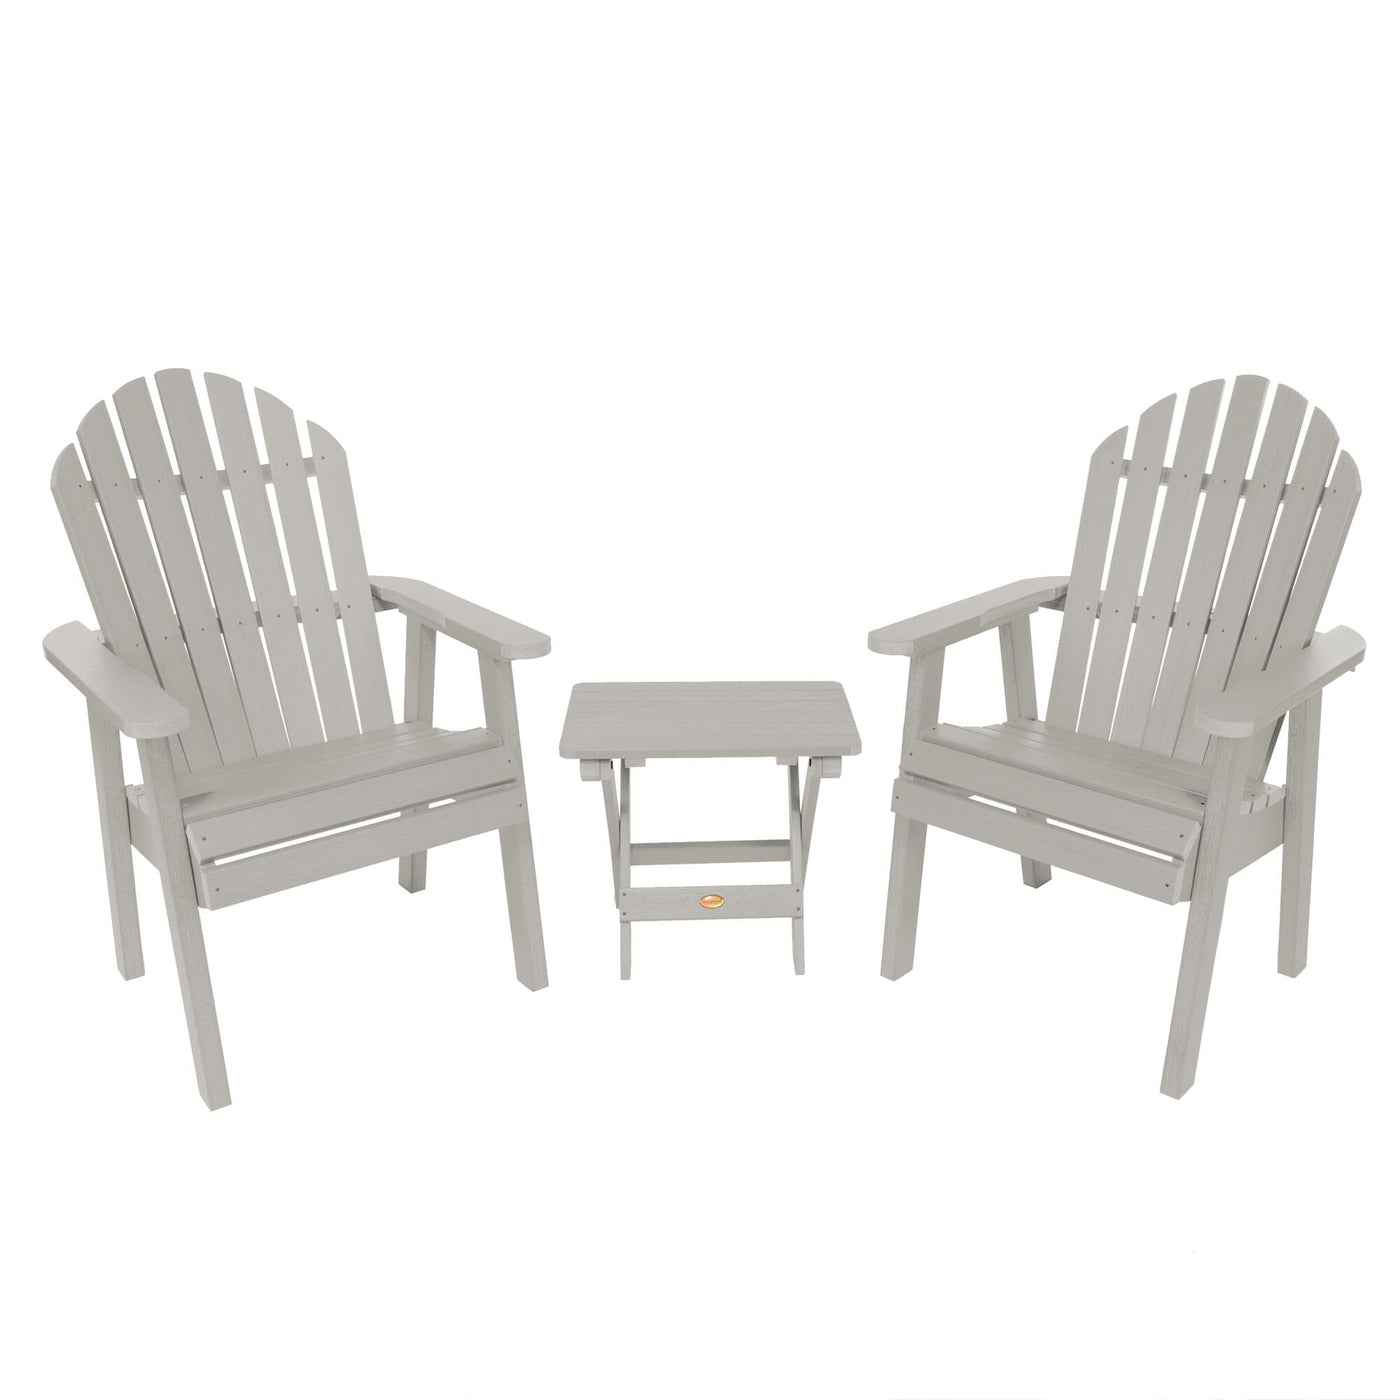 2 Hamilton Deck Chairs with Folding Side Table Kitted Sets Highwood USA Harbor Gray 